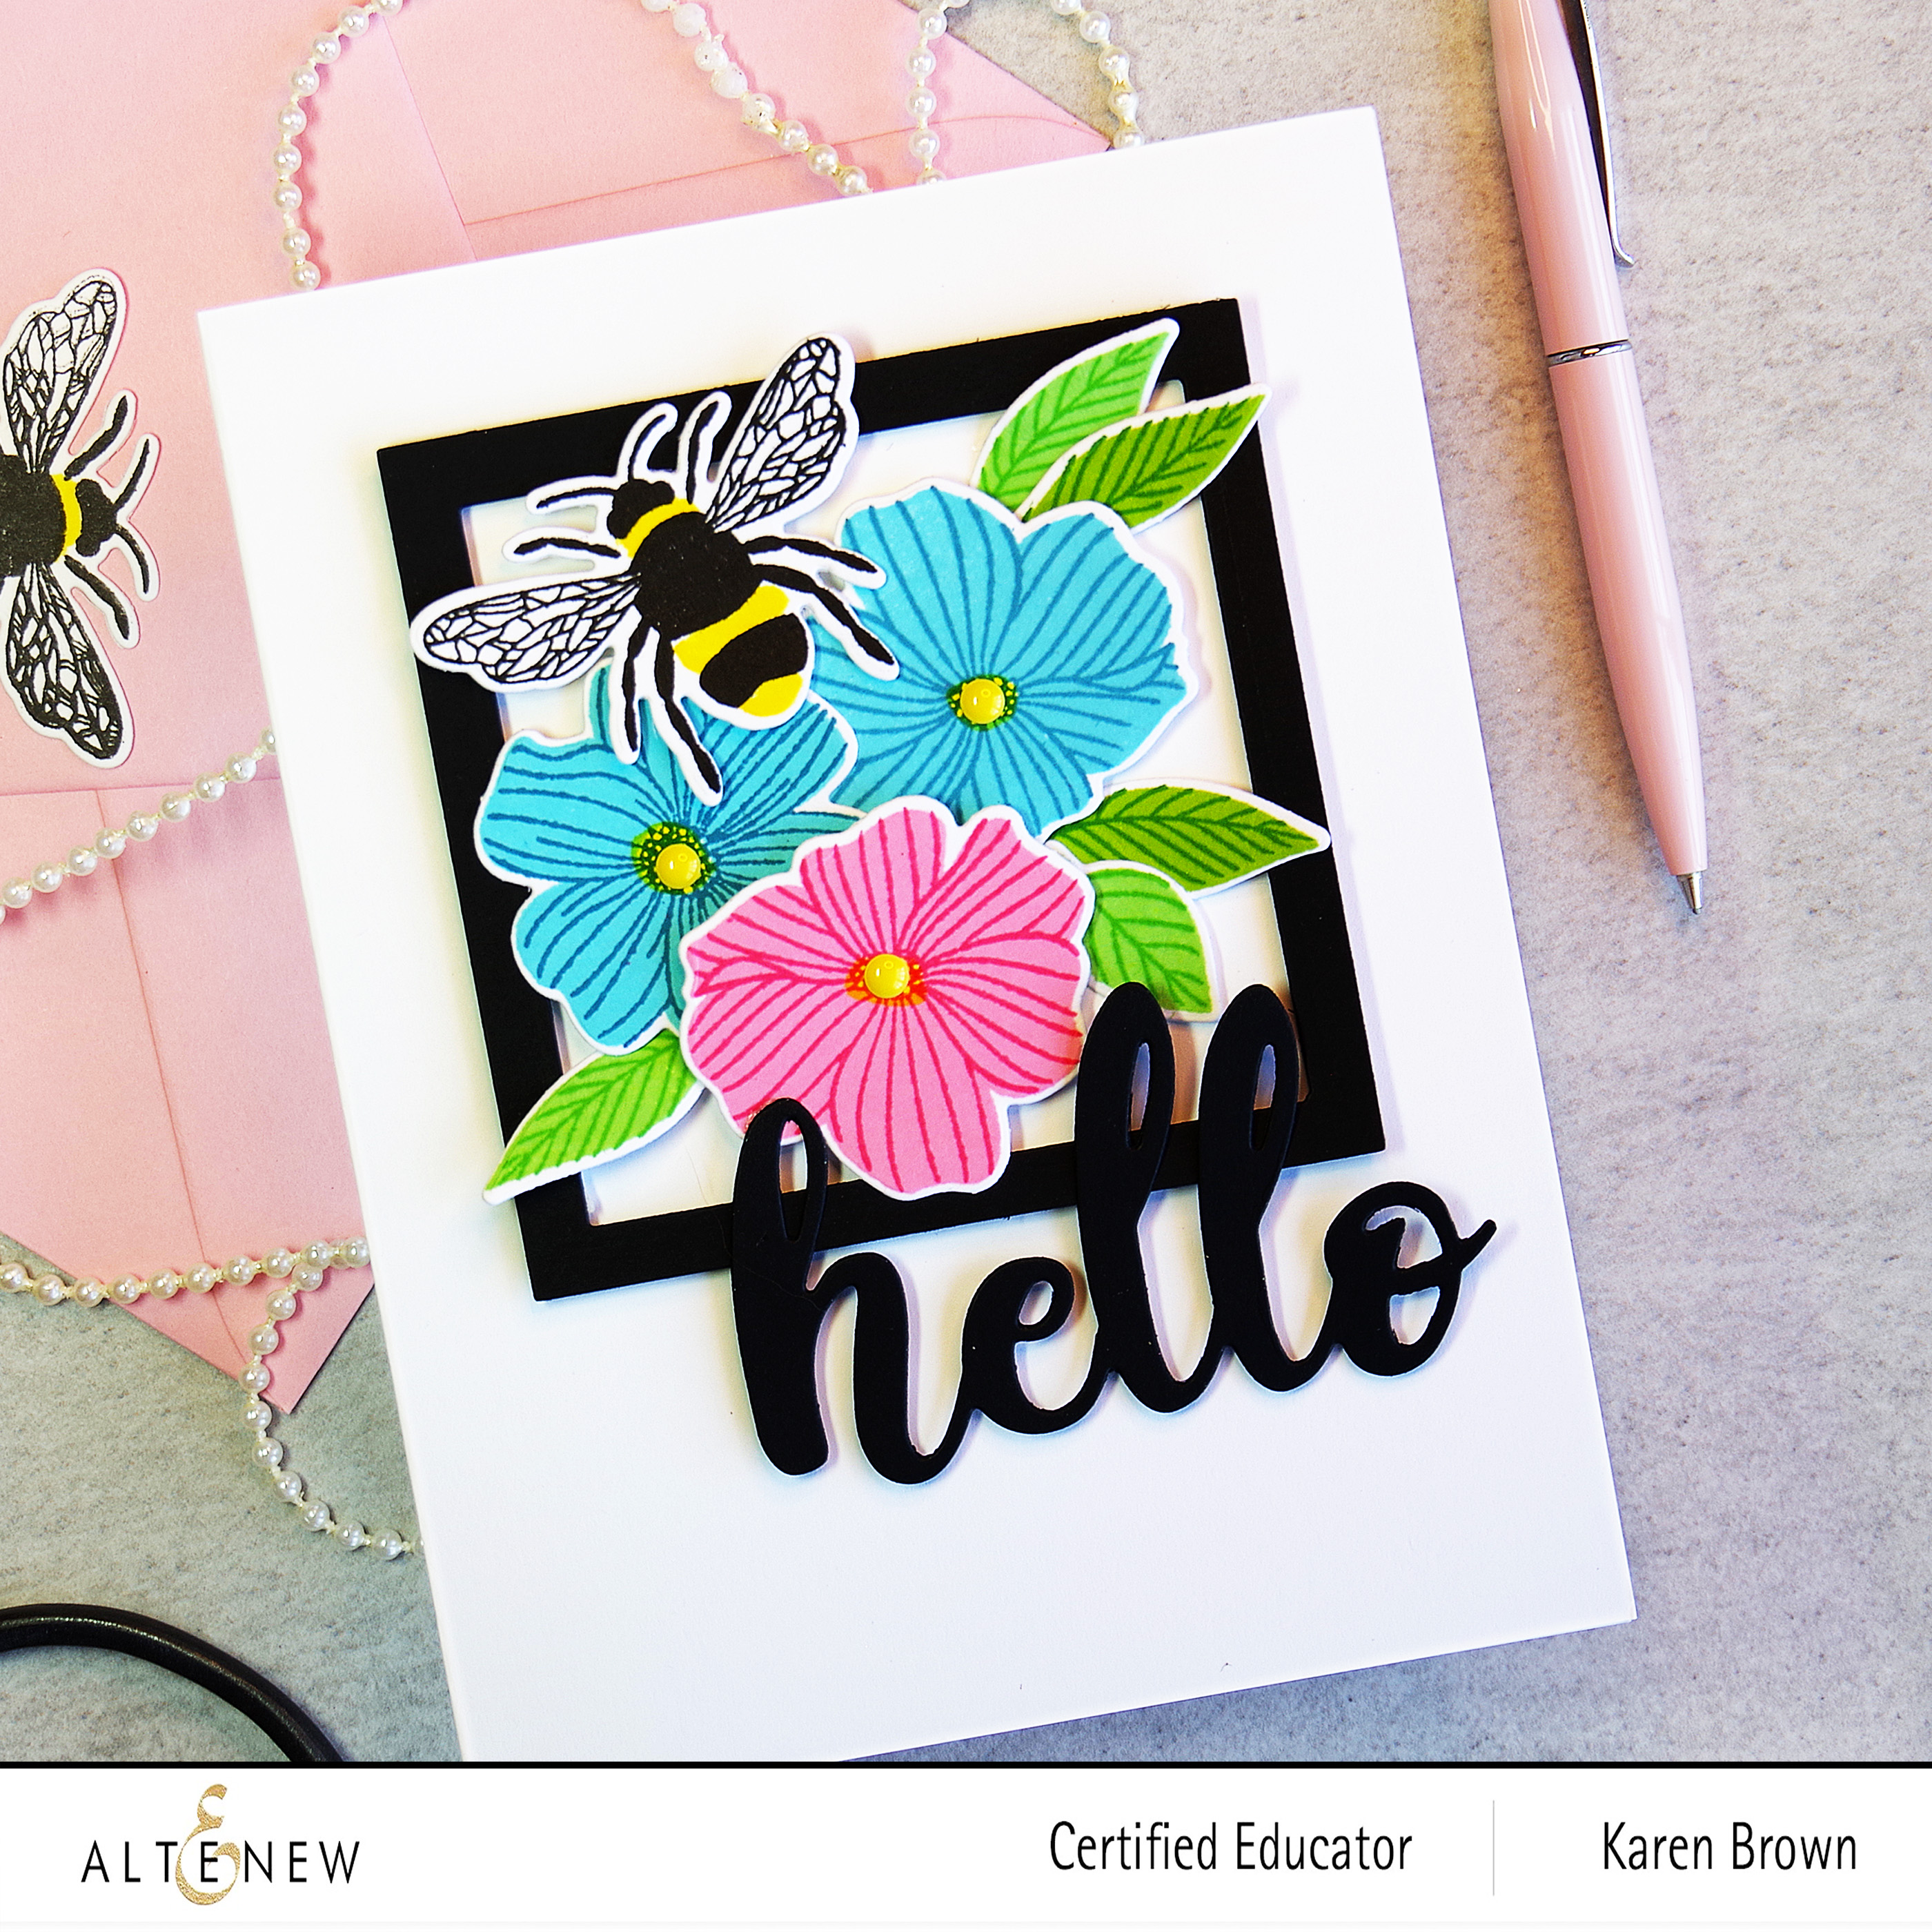 Handmade card with stamped and die cut doodle flowers + bee.
